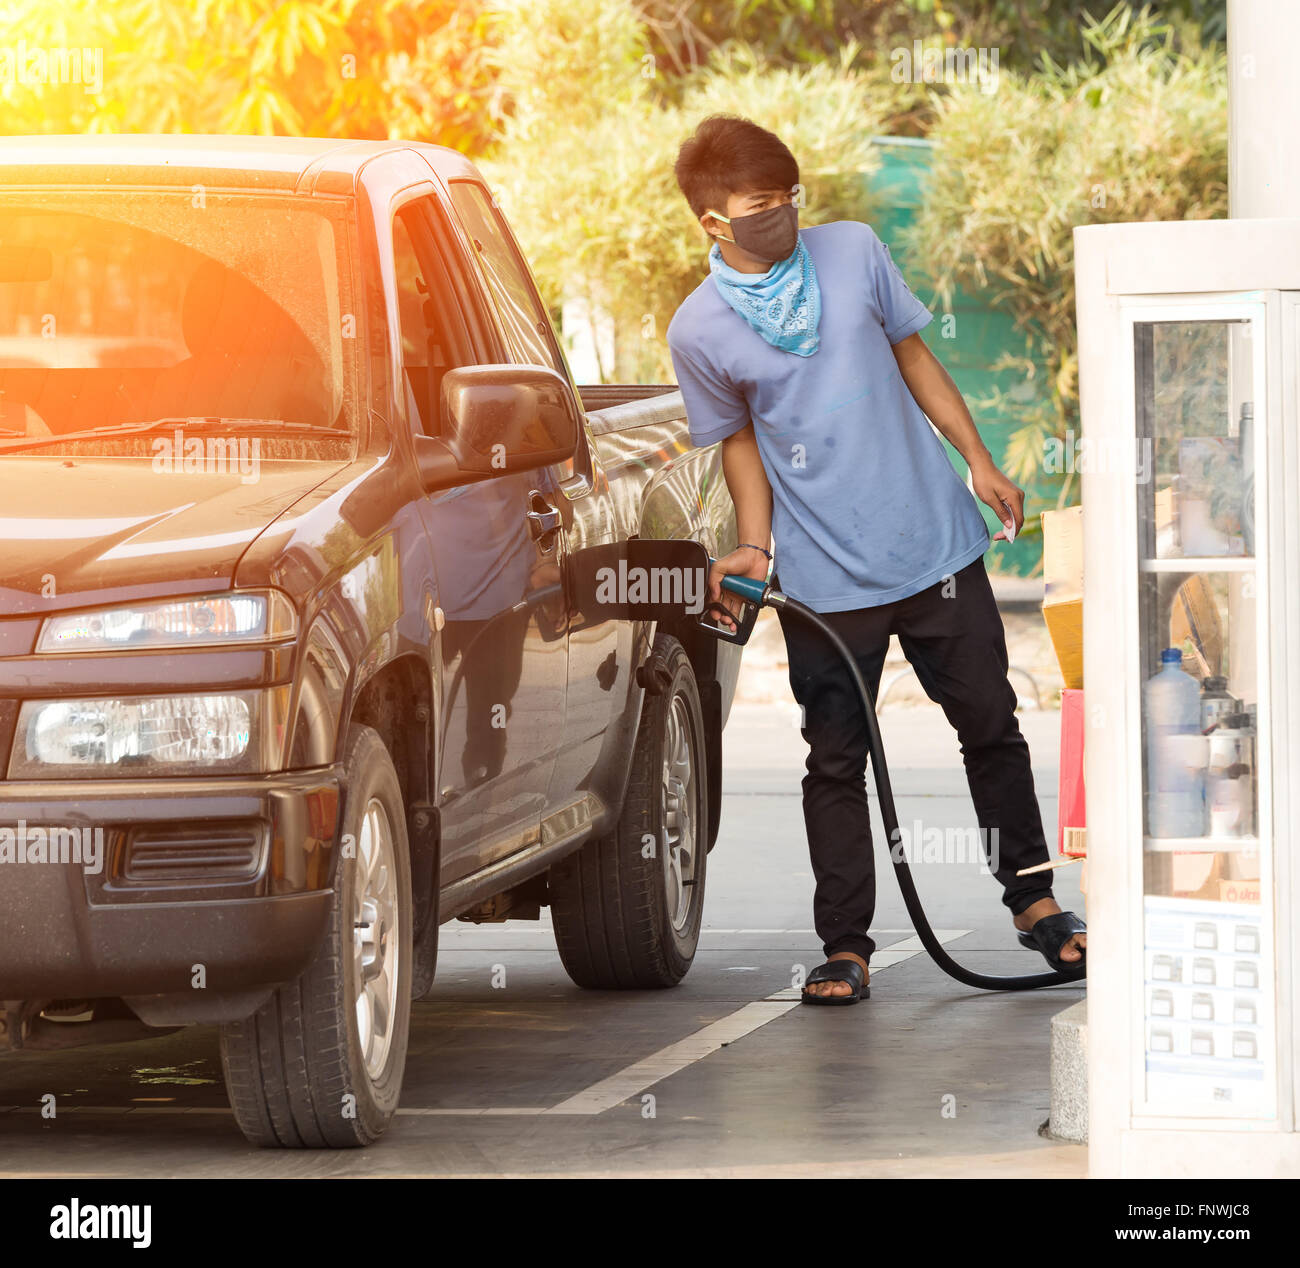 Asian man pumping gasoline fuel in car at gas station Stock Photo